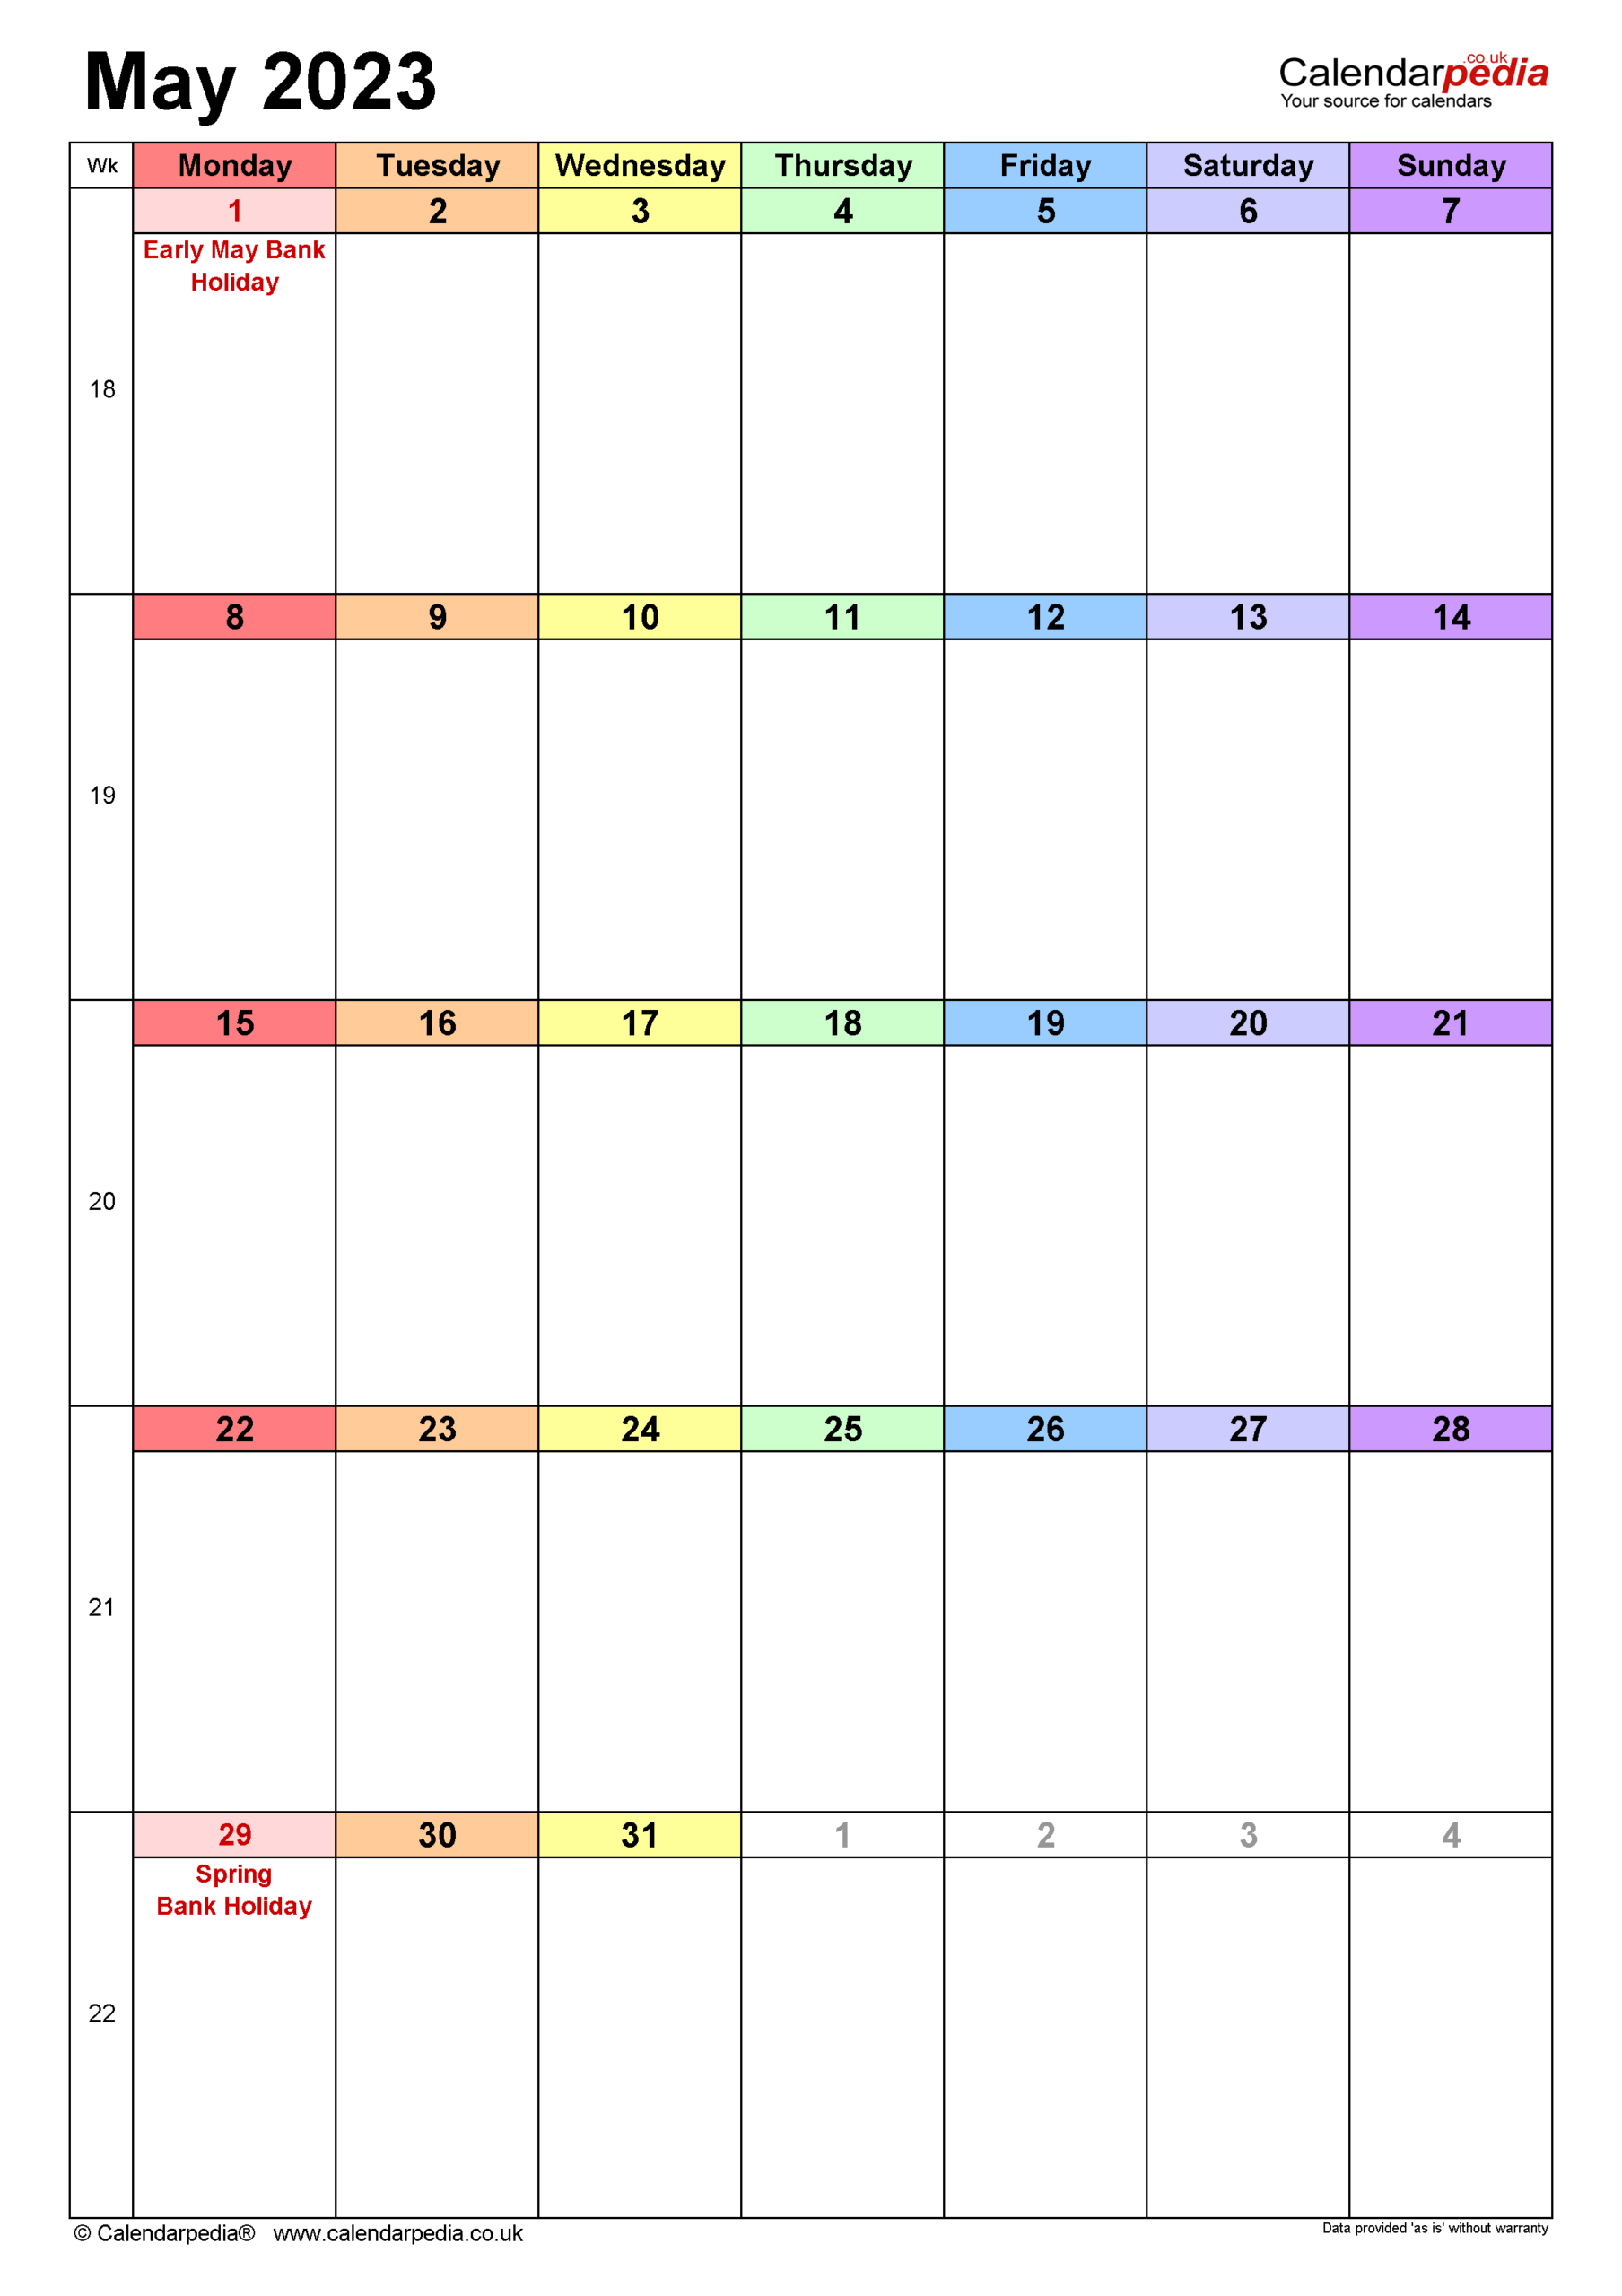 Calendar May 2023 (Uk) With Excel, Word And Pdf Templates intended for Free Vertical Printable Calendars For April 2023 Calendar Holiday Usa 2023